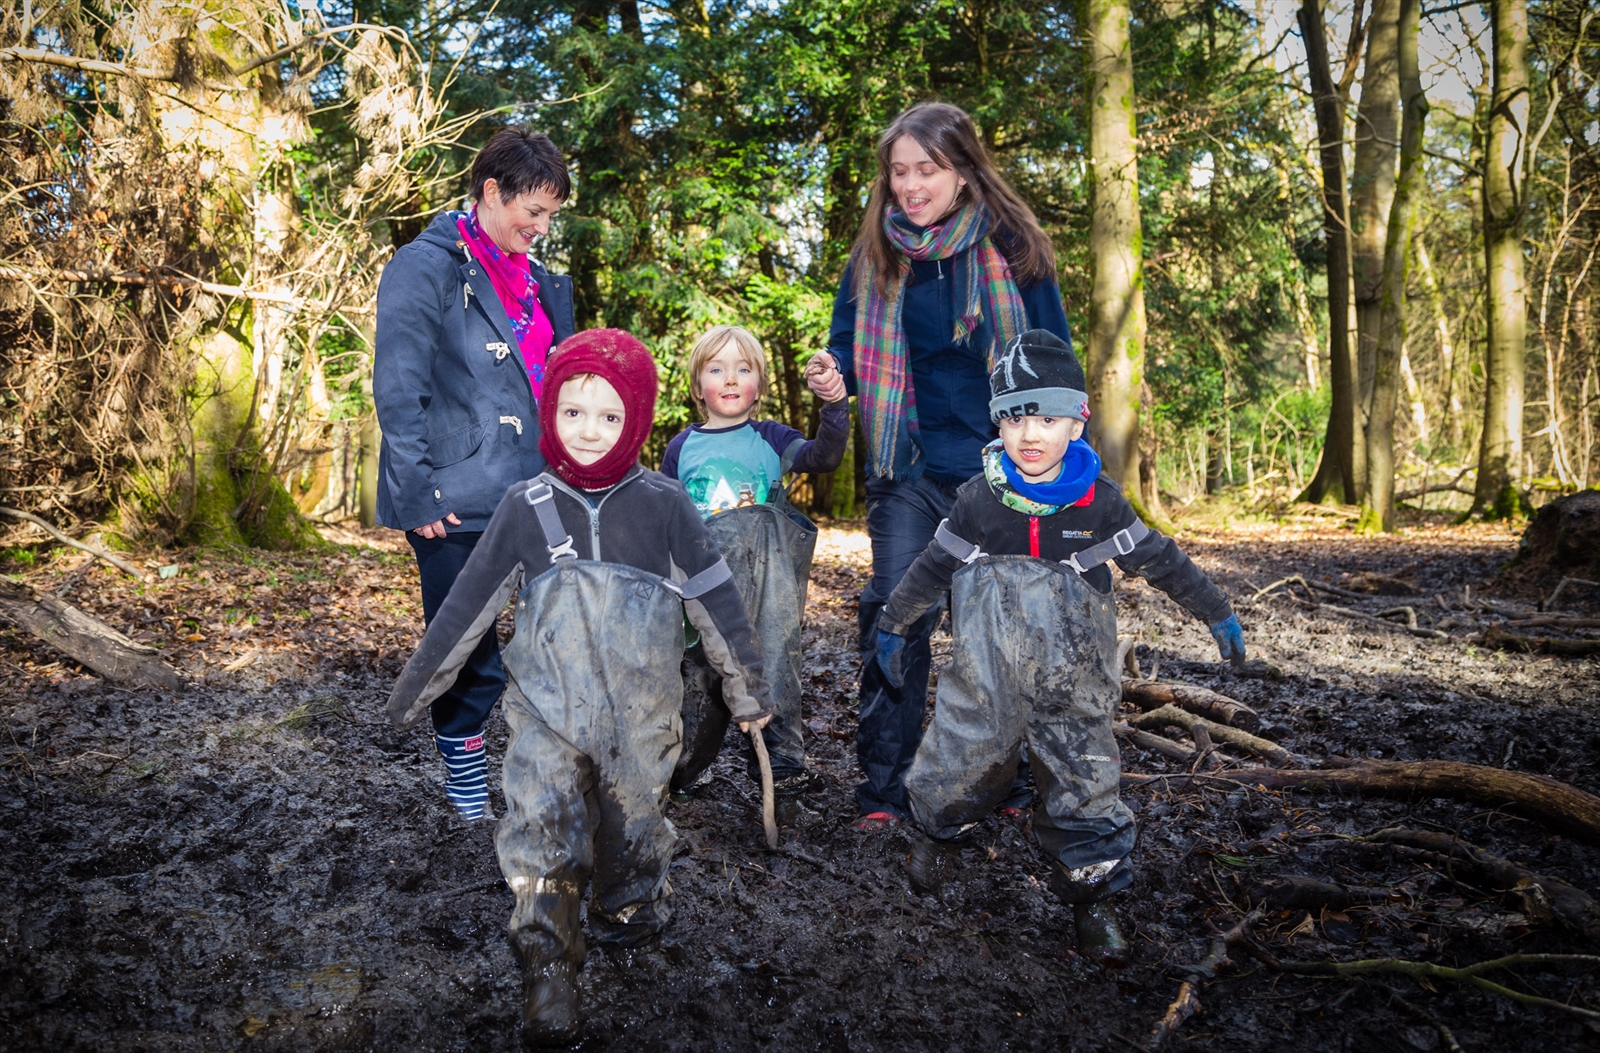 Supporting outdoor play across Scotland